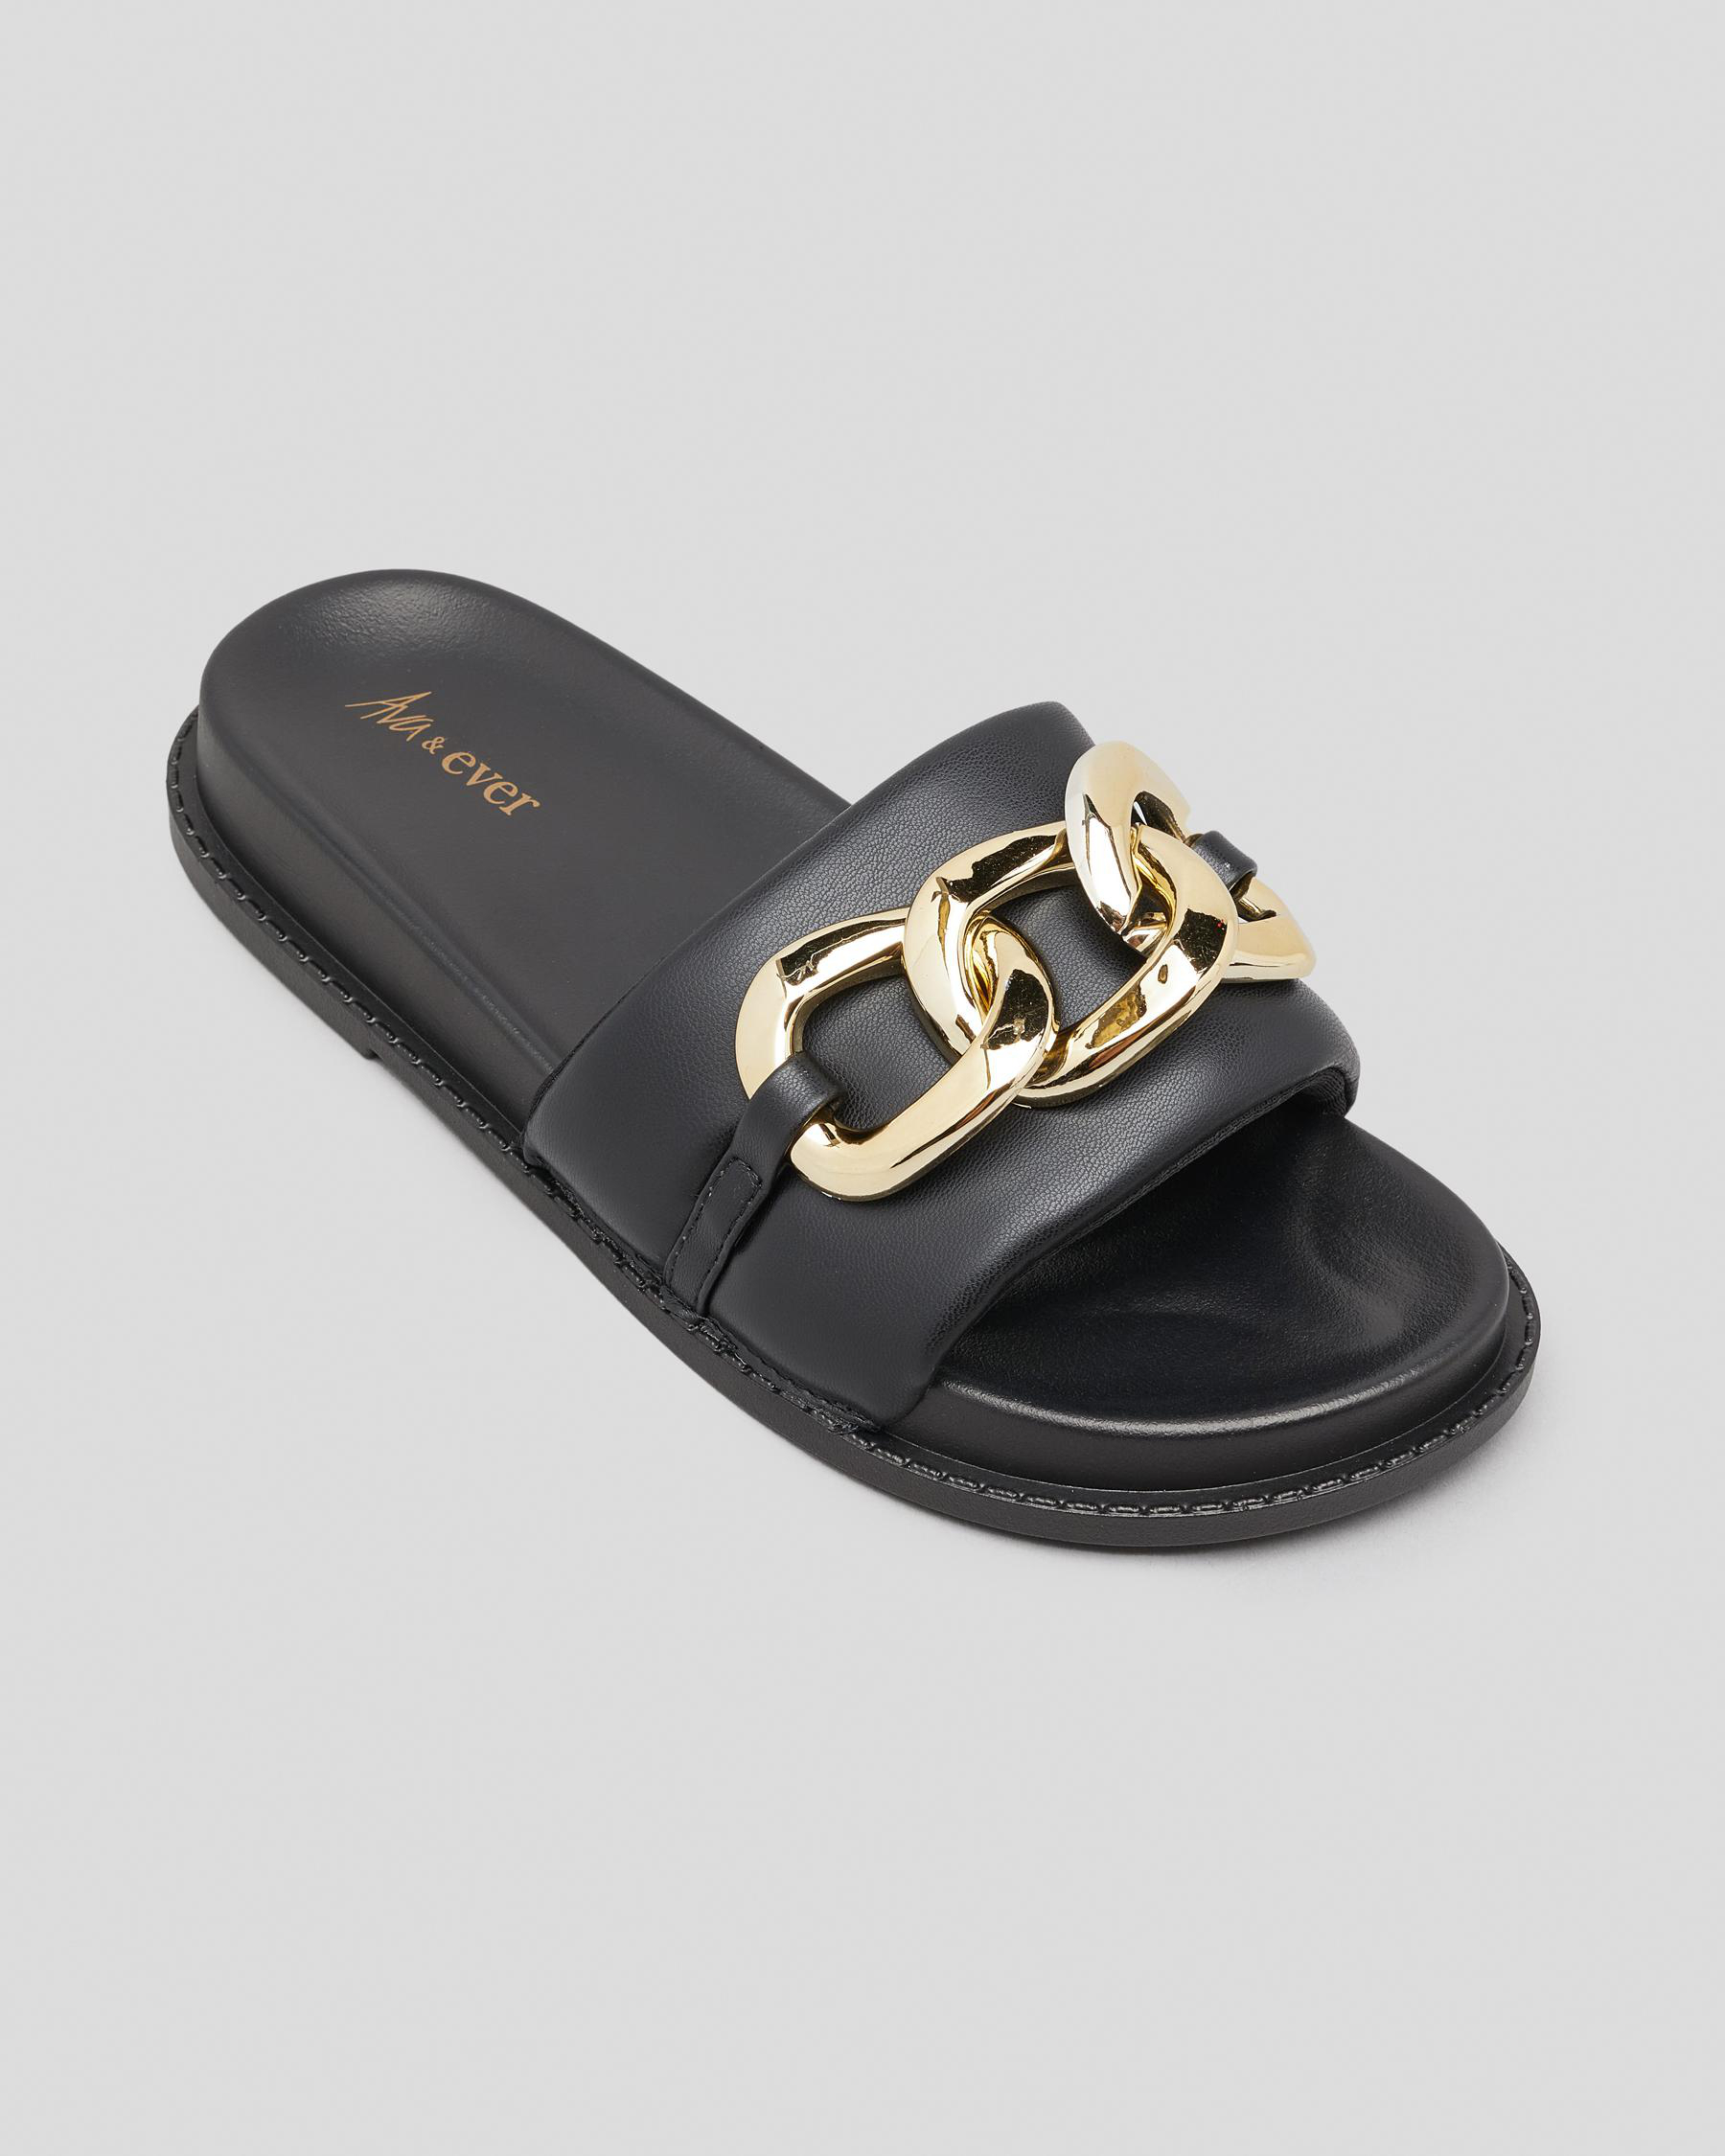 Ava And Ever Keisha Slide Sandals In Black/gold - Fast Shipping & Easy ...